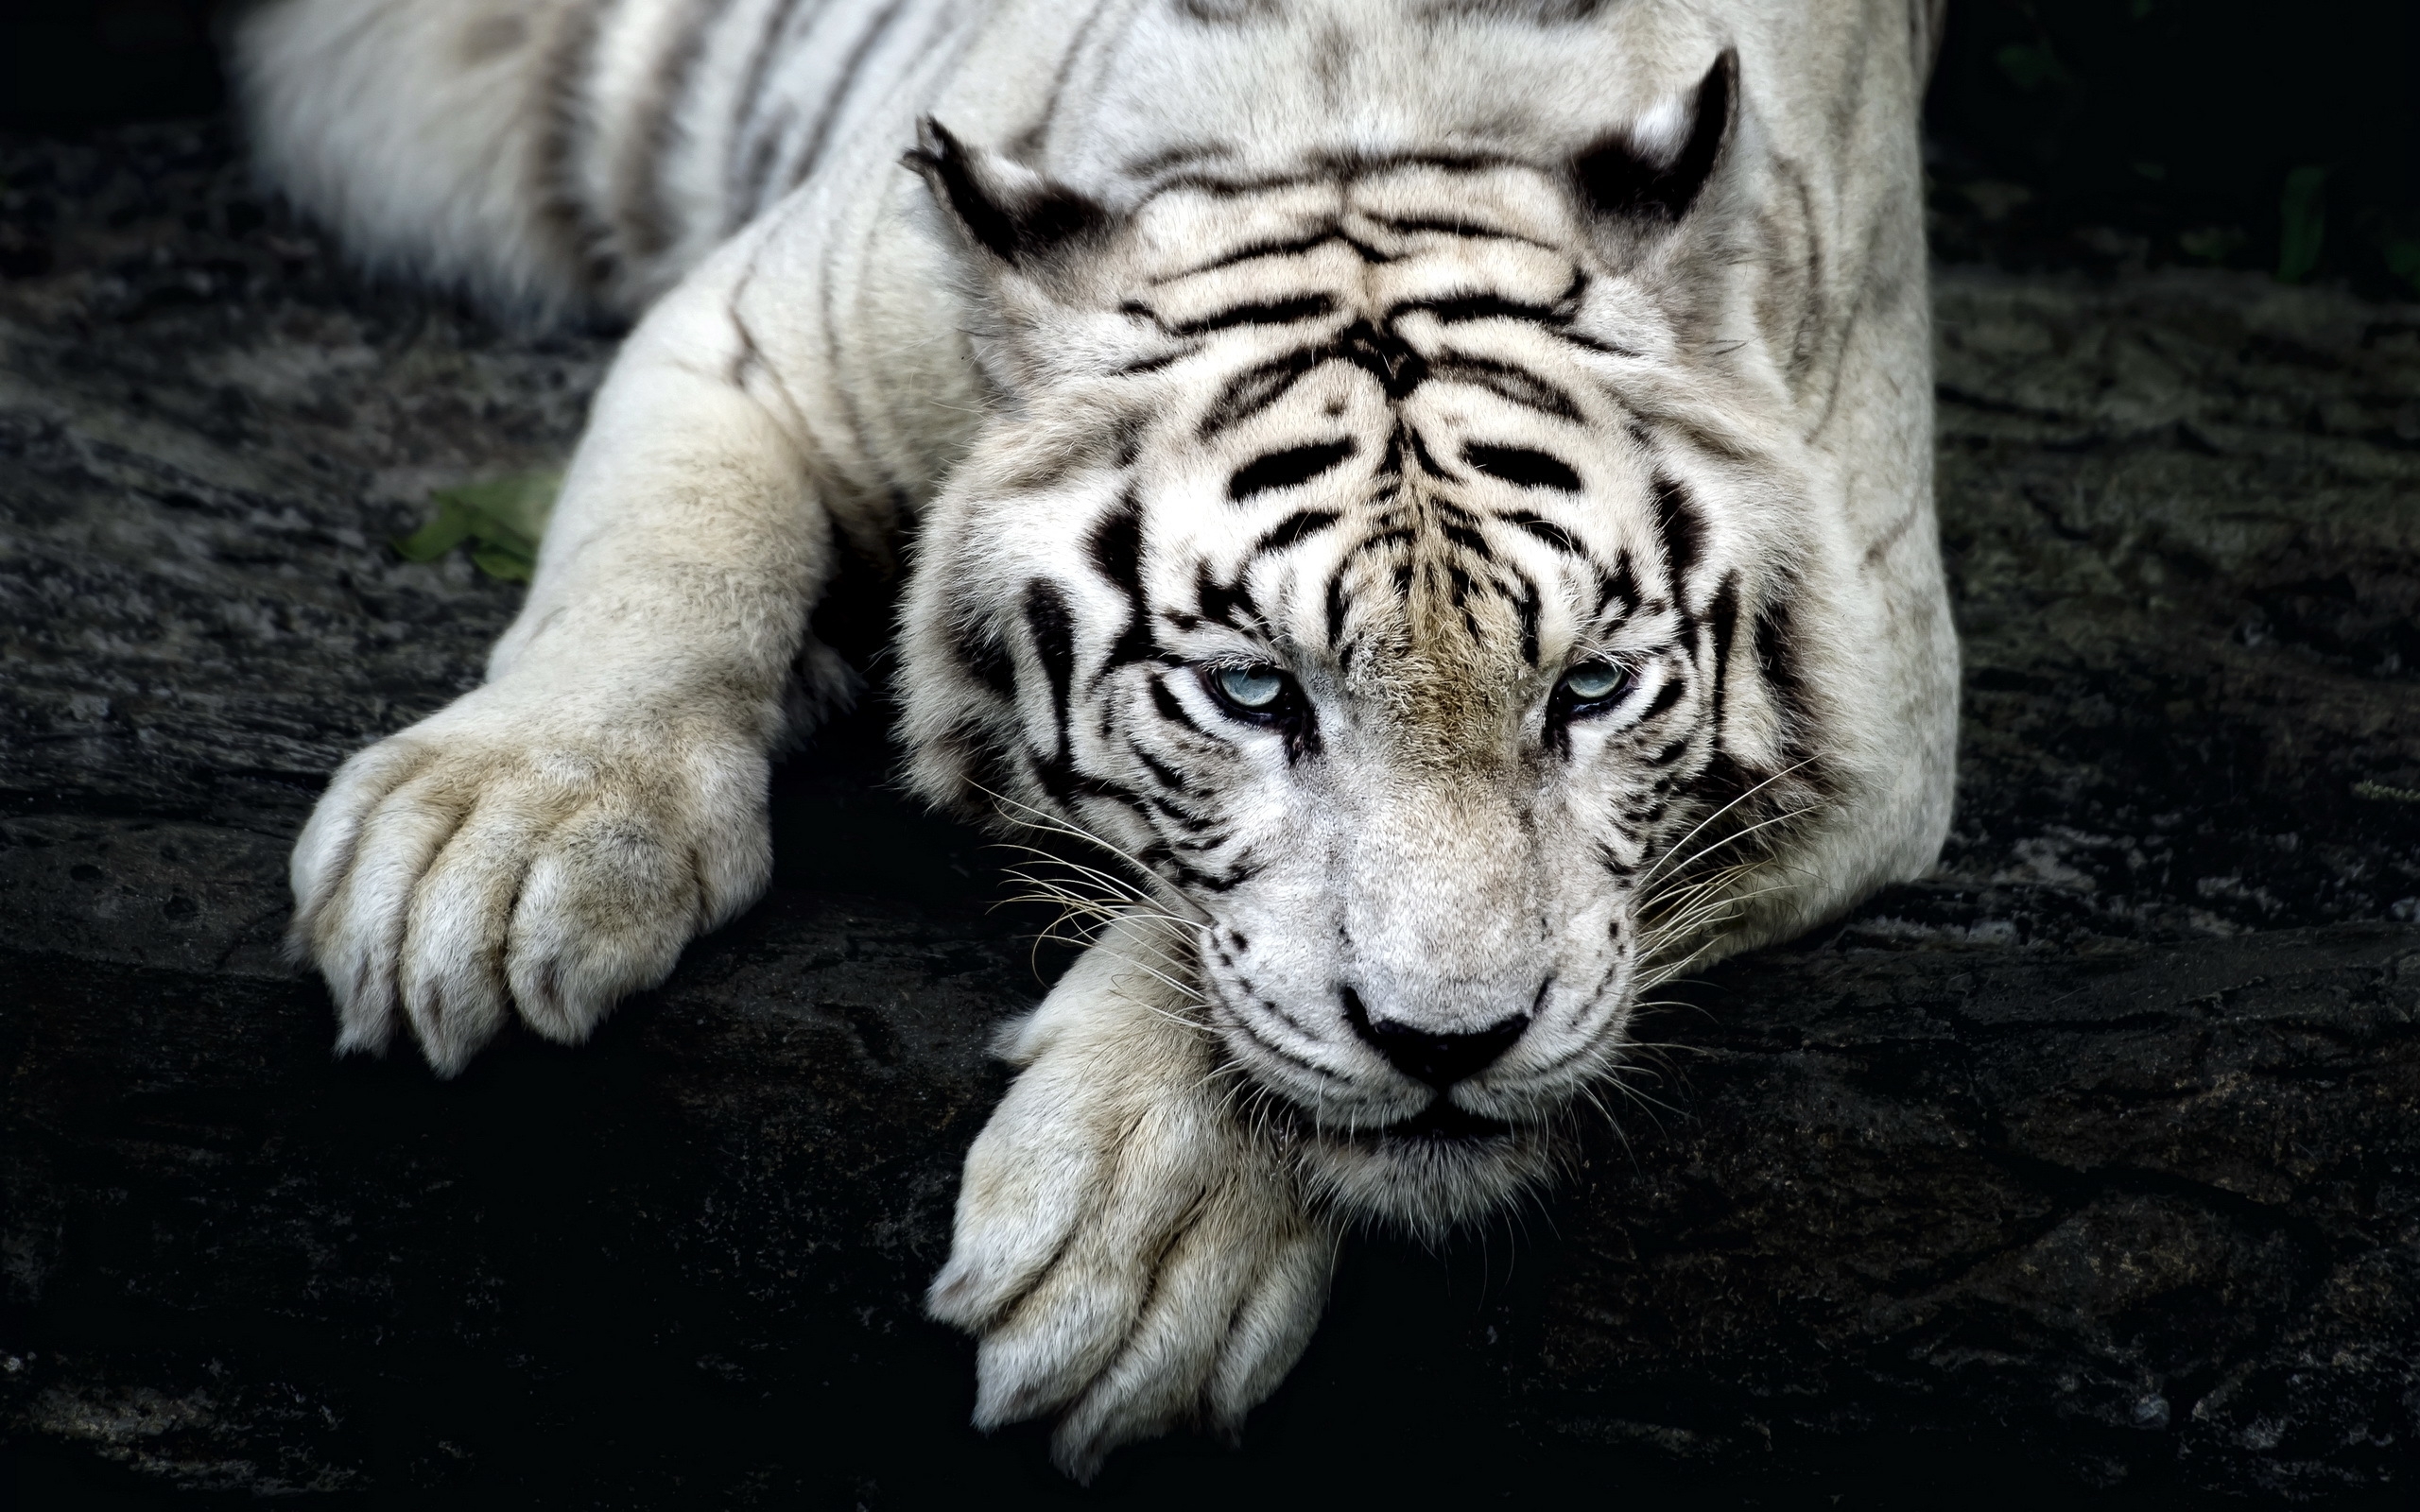 10 Best White Tiger Hd Wallpapers 1920X1080 FULL HD 1080p For PC Background